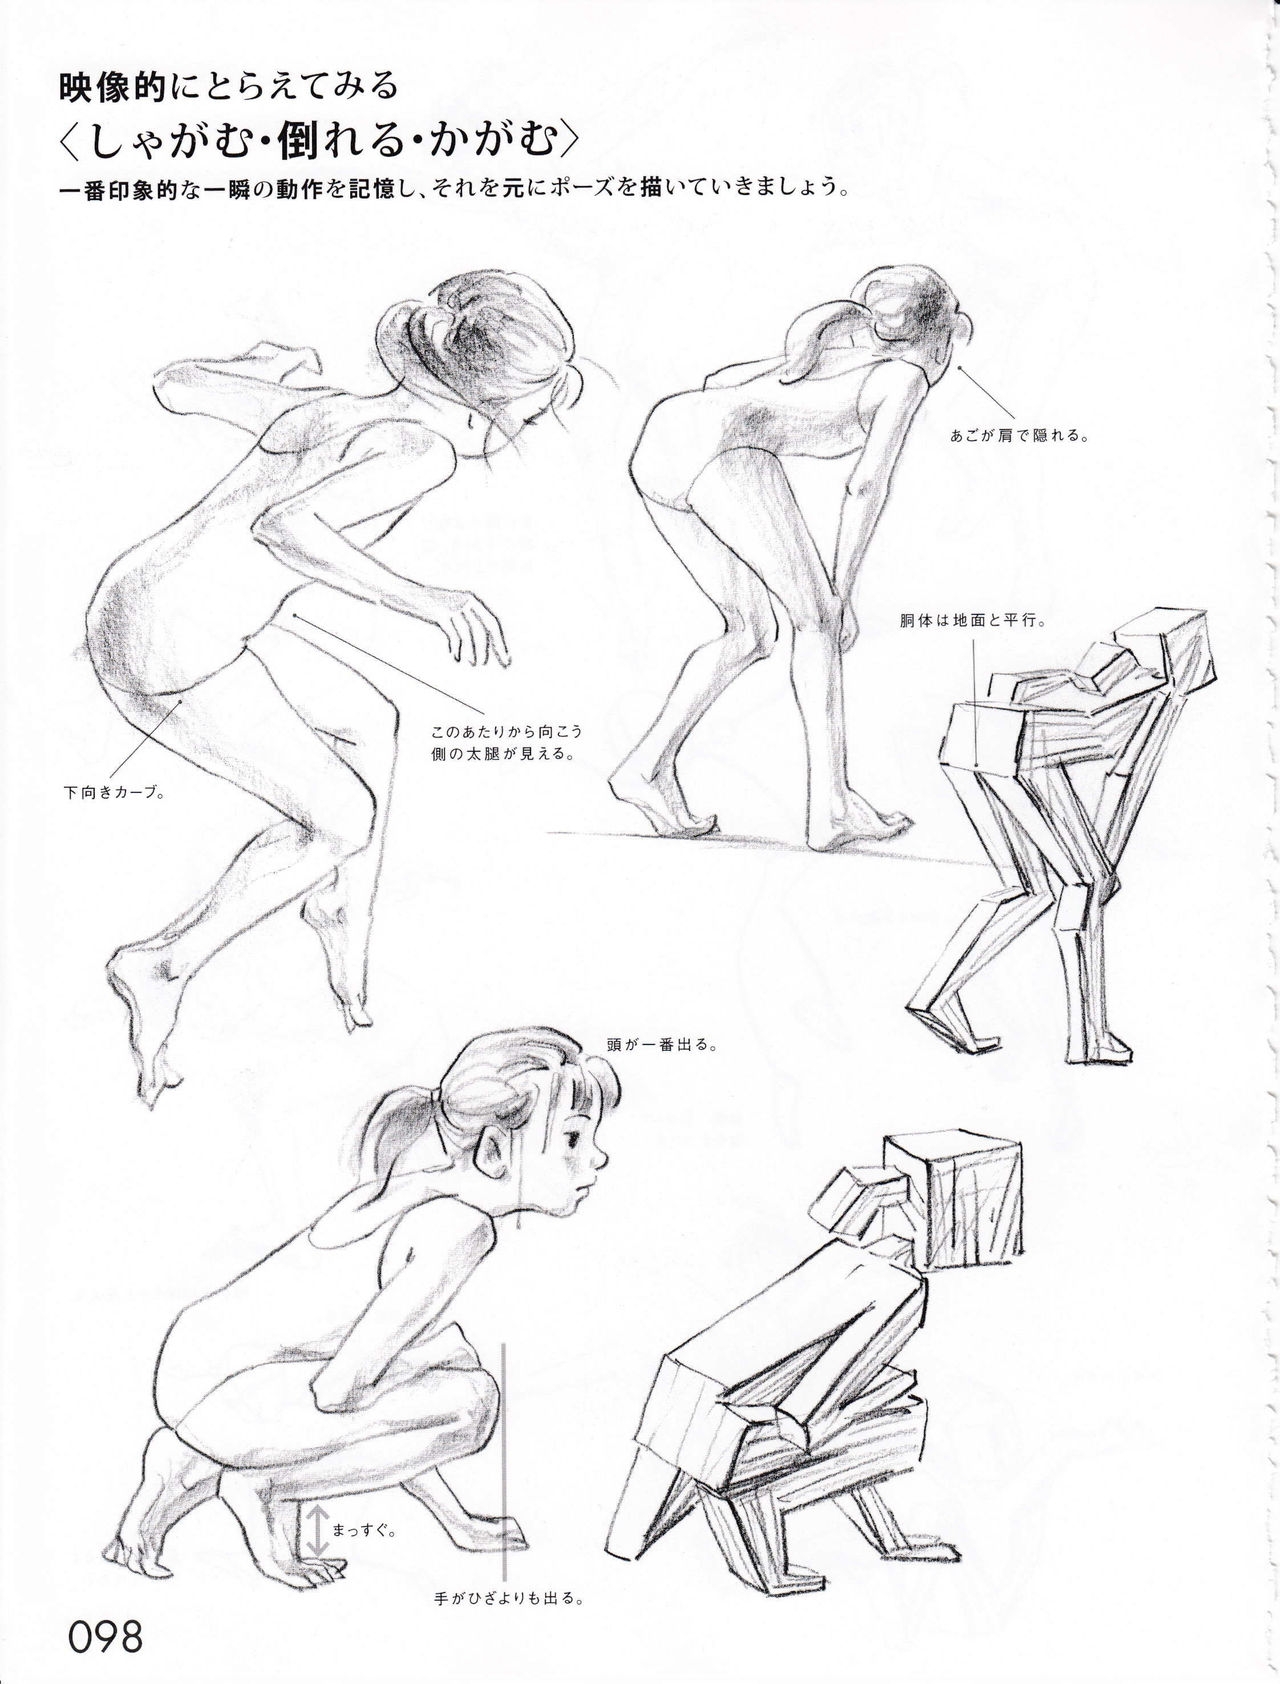 Drawing the human body and girls 100